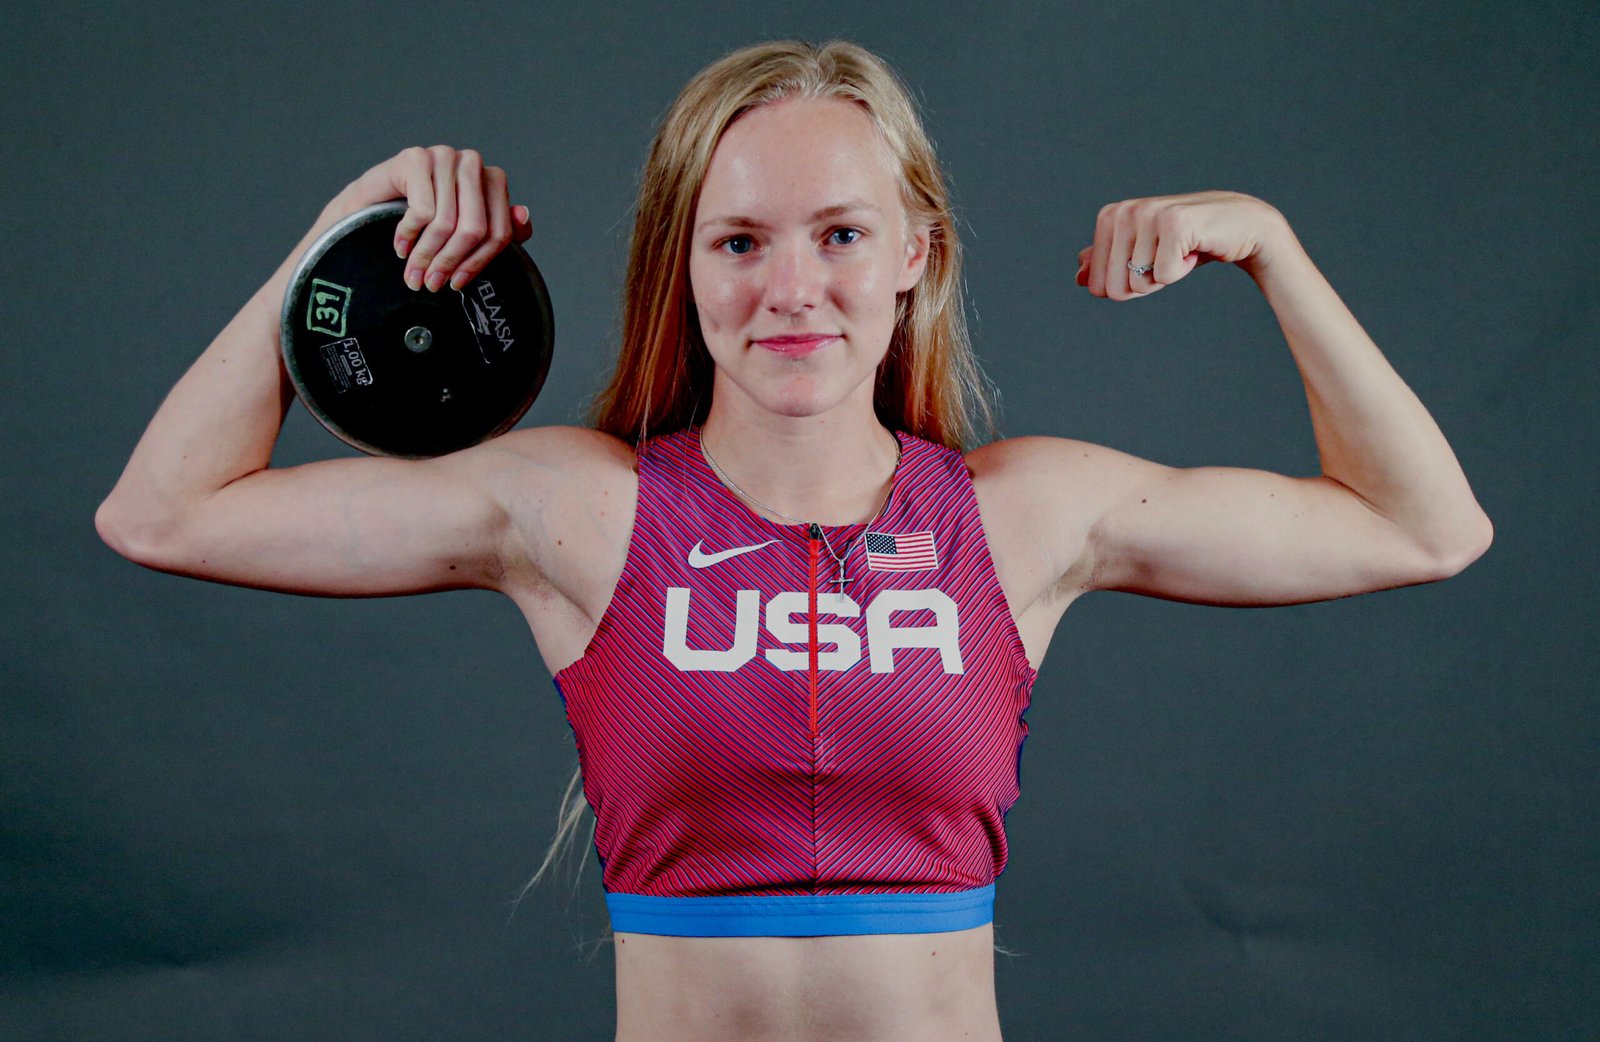 Jessica is smiling and flexing while holding the discus.